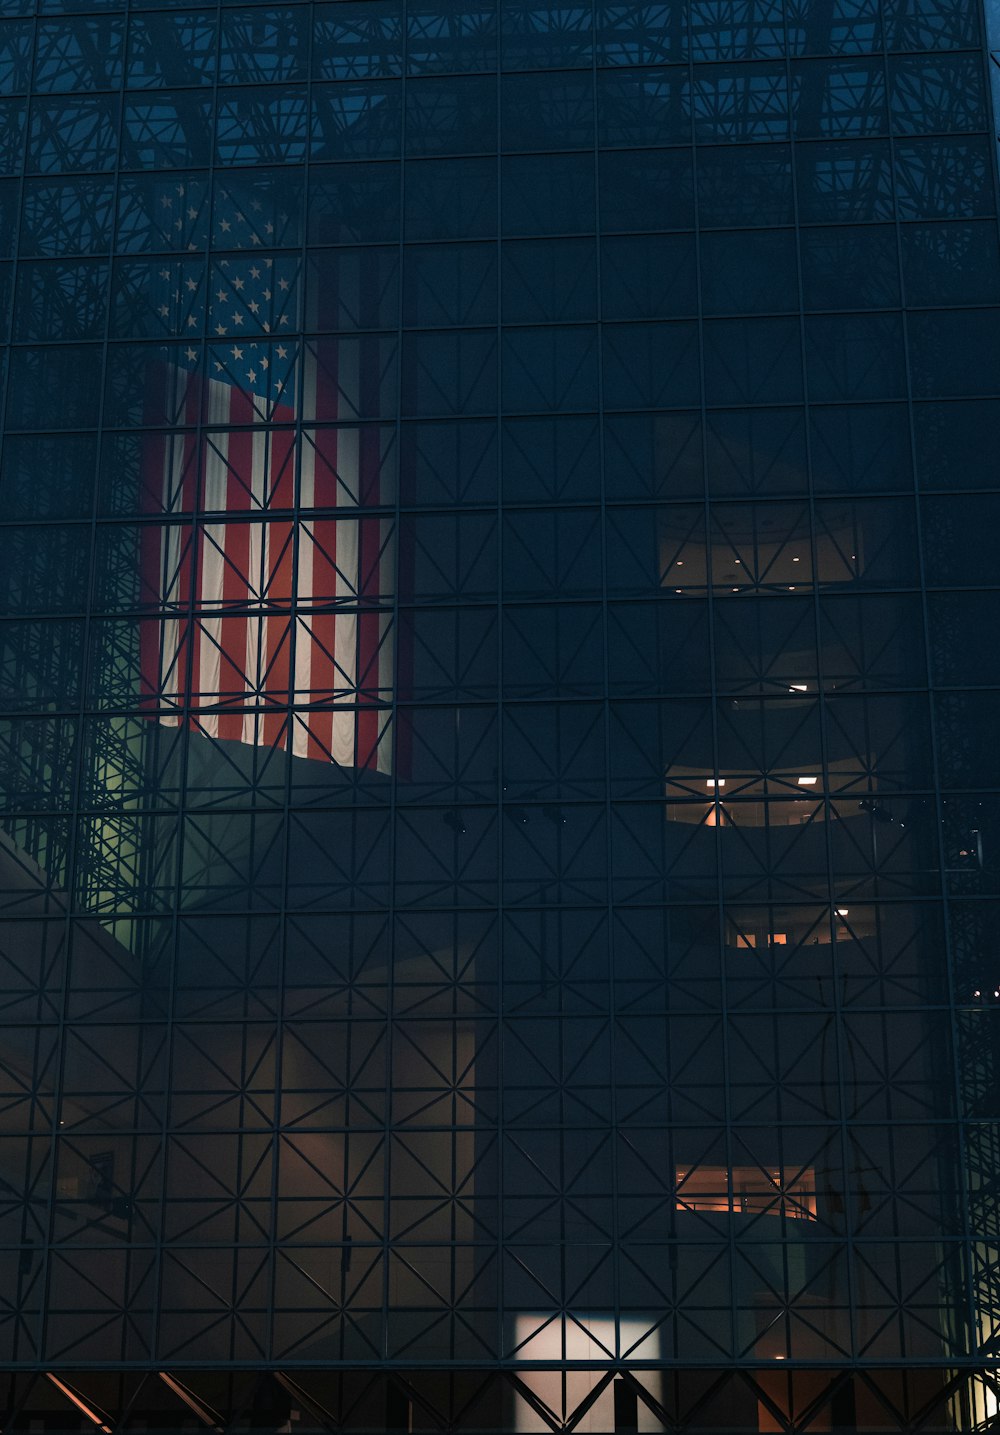 the reflection of a building in the glass of another building